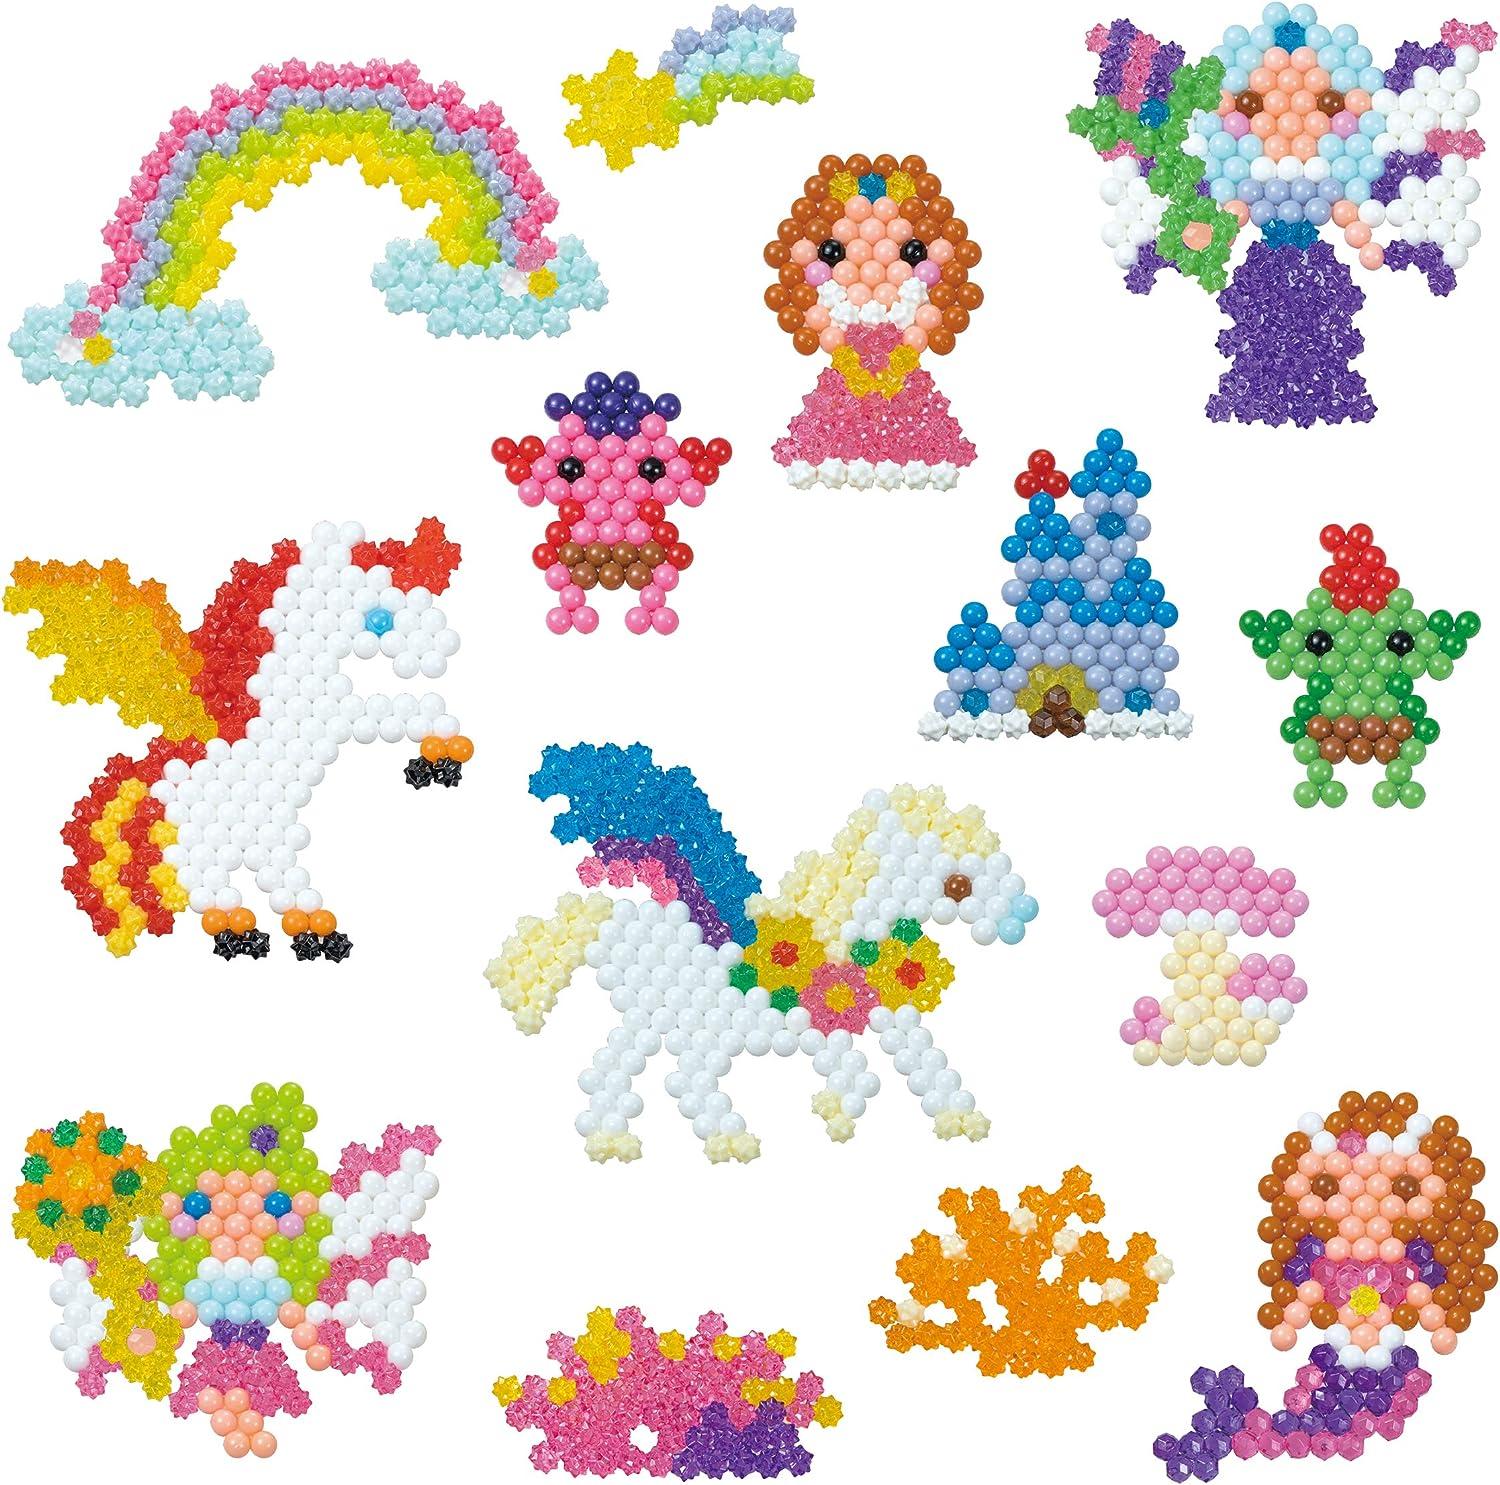 These Aquabeads kits have everything you need to create your very